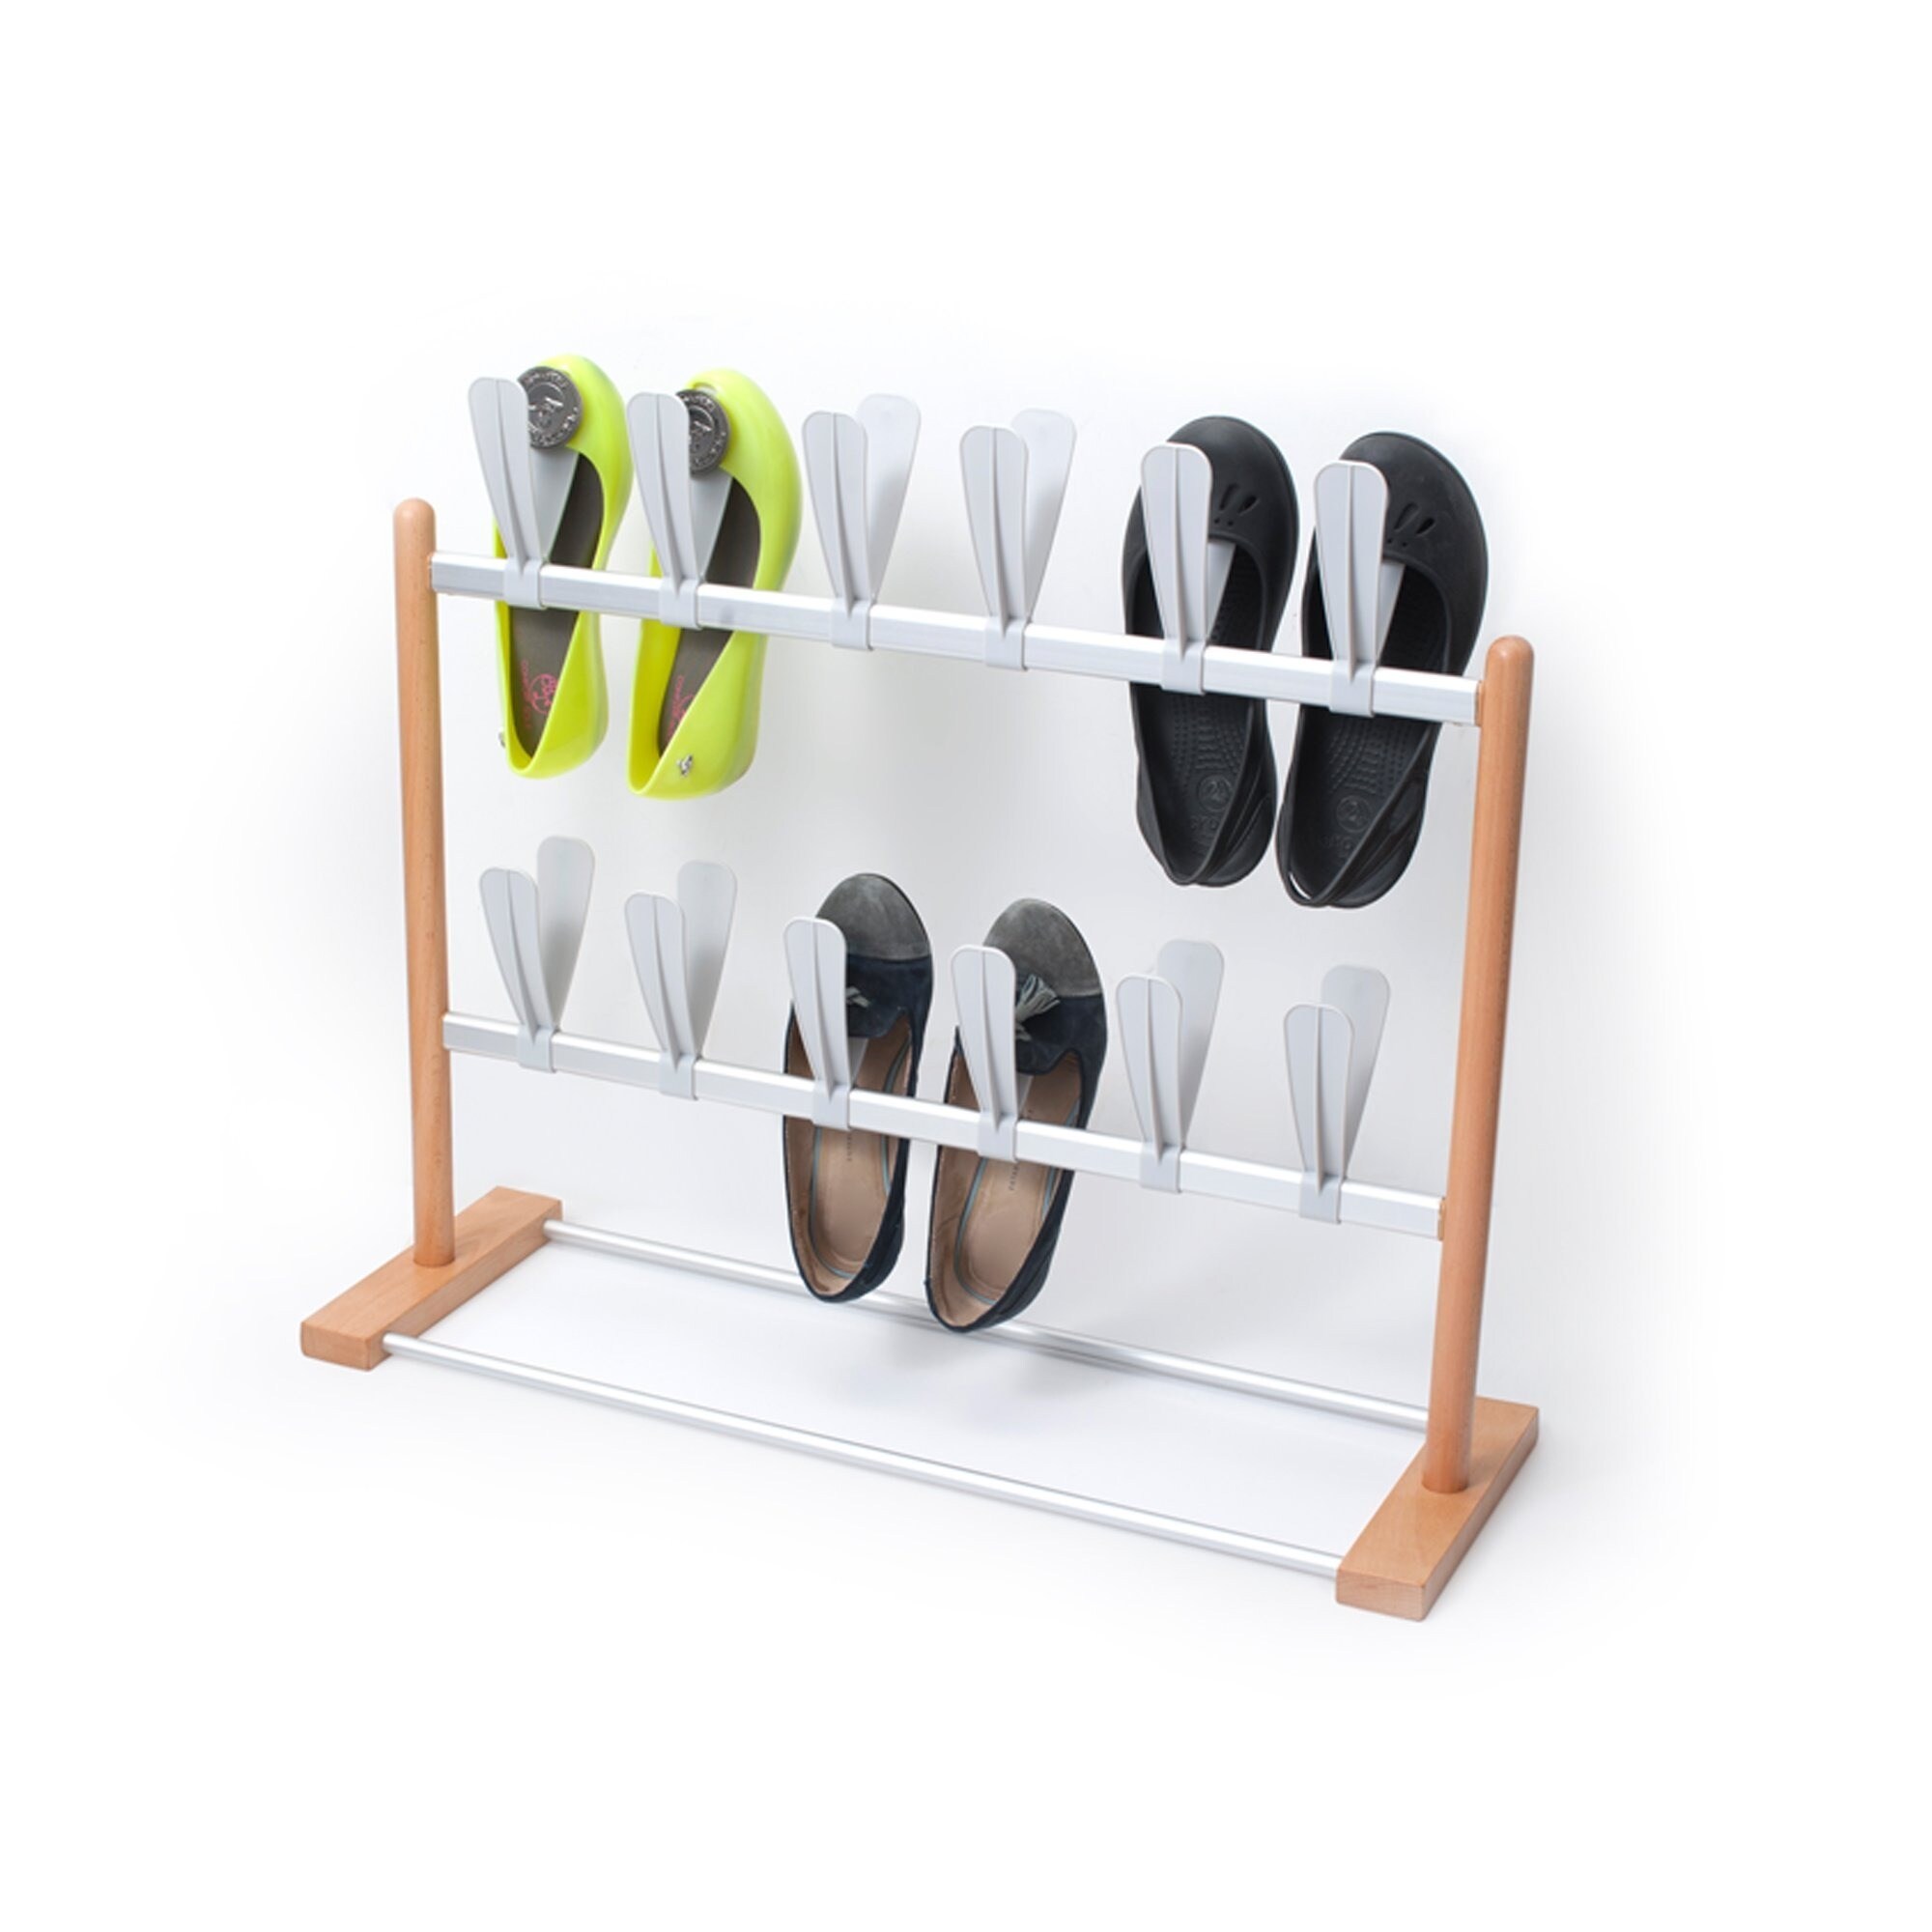 https://ak1.ostkcdn.com/images/products/17086448/INNOKA-Modern-Pop-On-Shoe-Rack-with-Sturdy-Base-Space-saving-Removeable-Shoes-Holder-for-Closets-For-Up-to-12-Pairs-of-Shoes-99aed135-e8cc-4072-acdd-fdc426ecf218.jpg